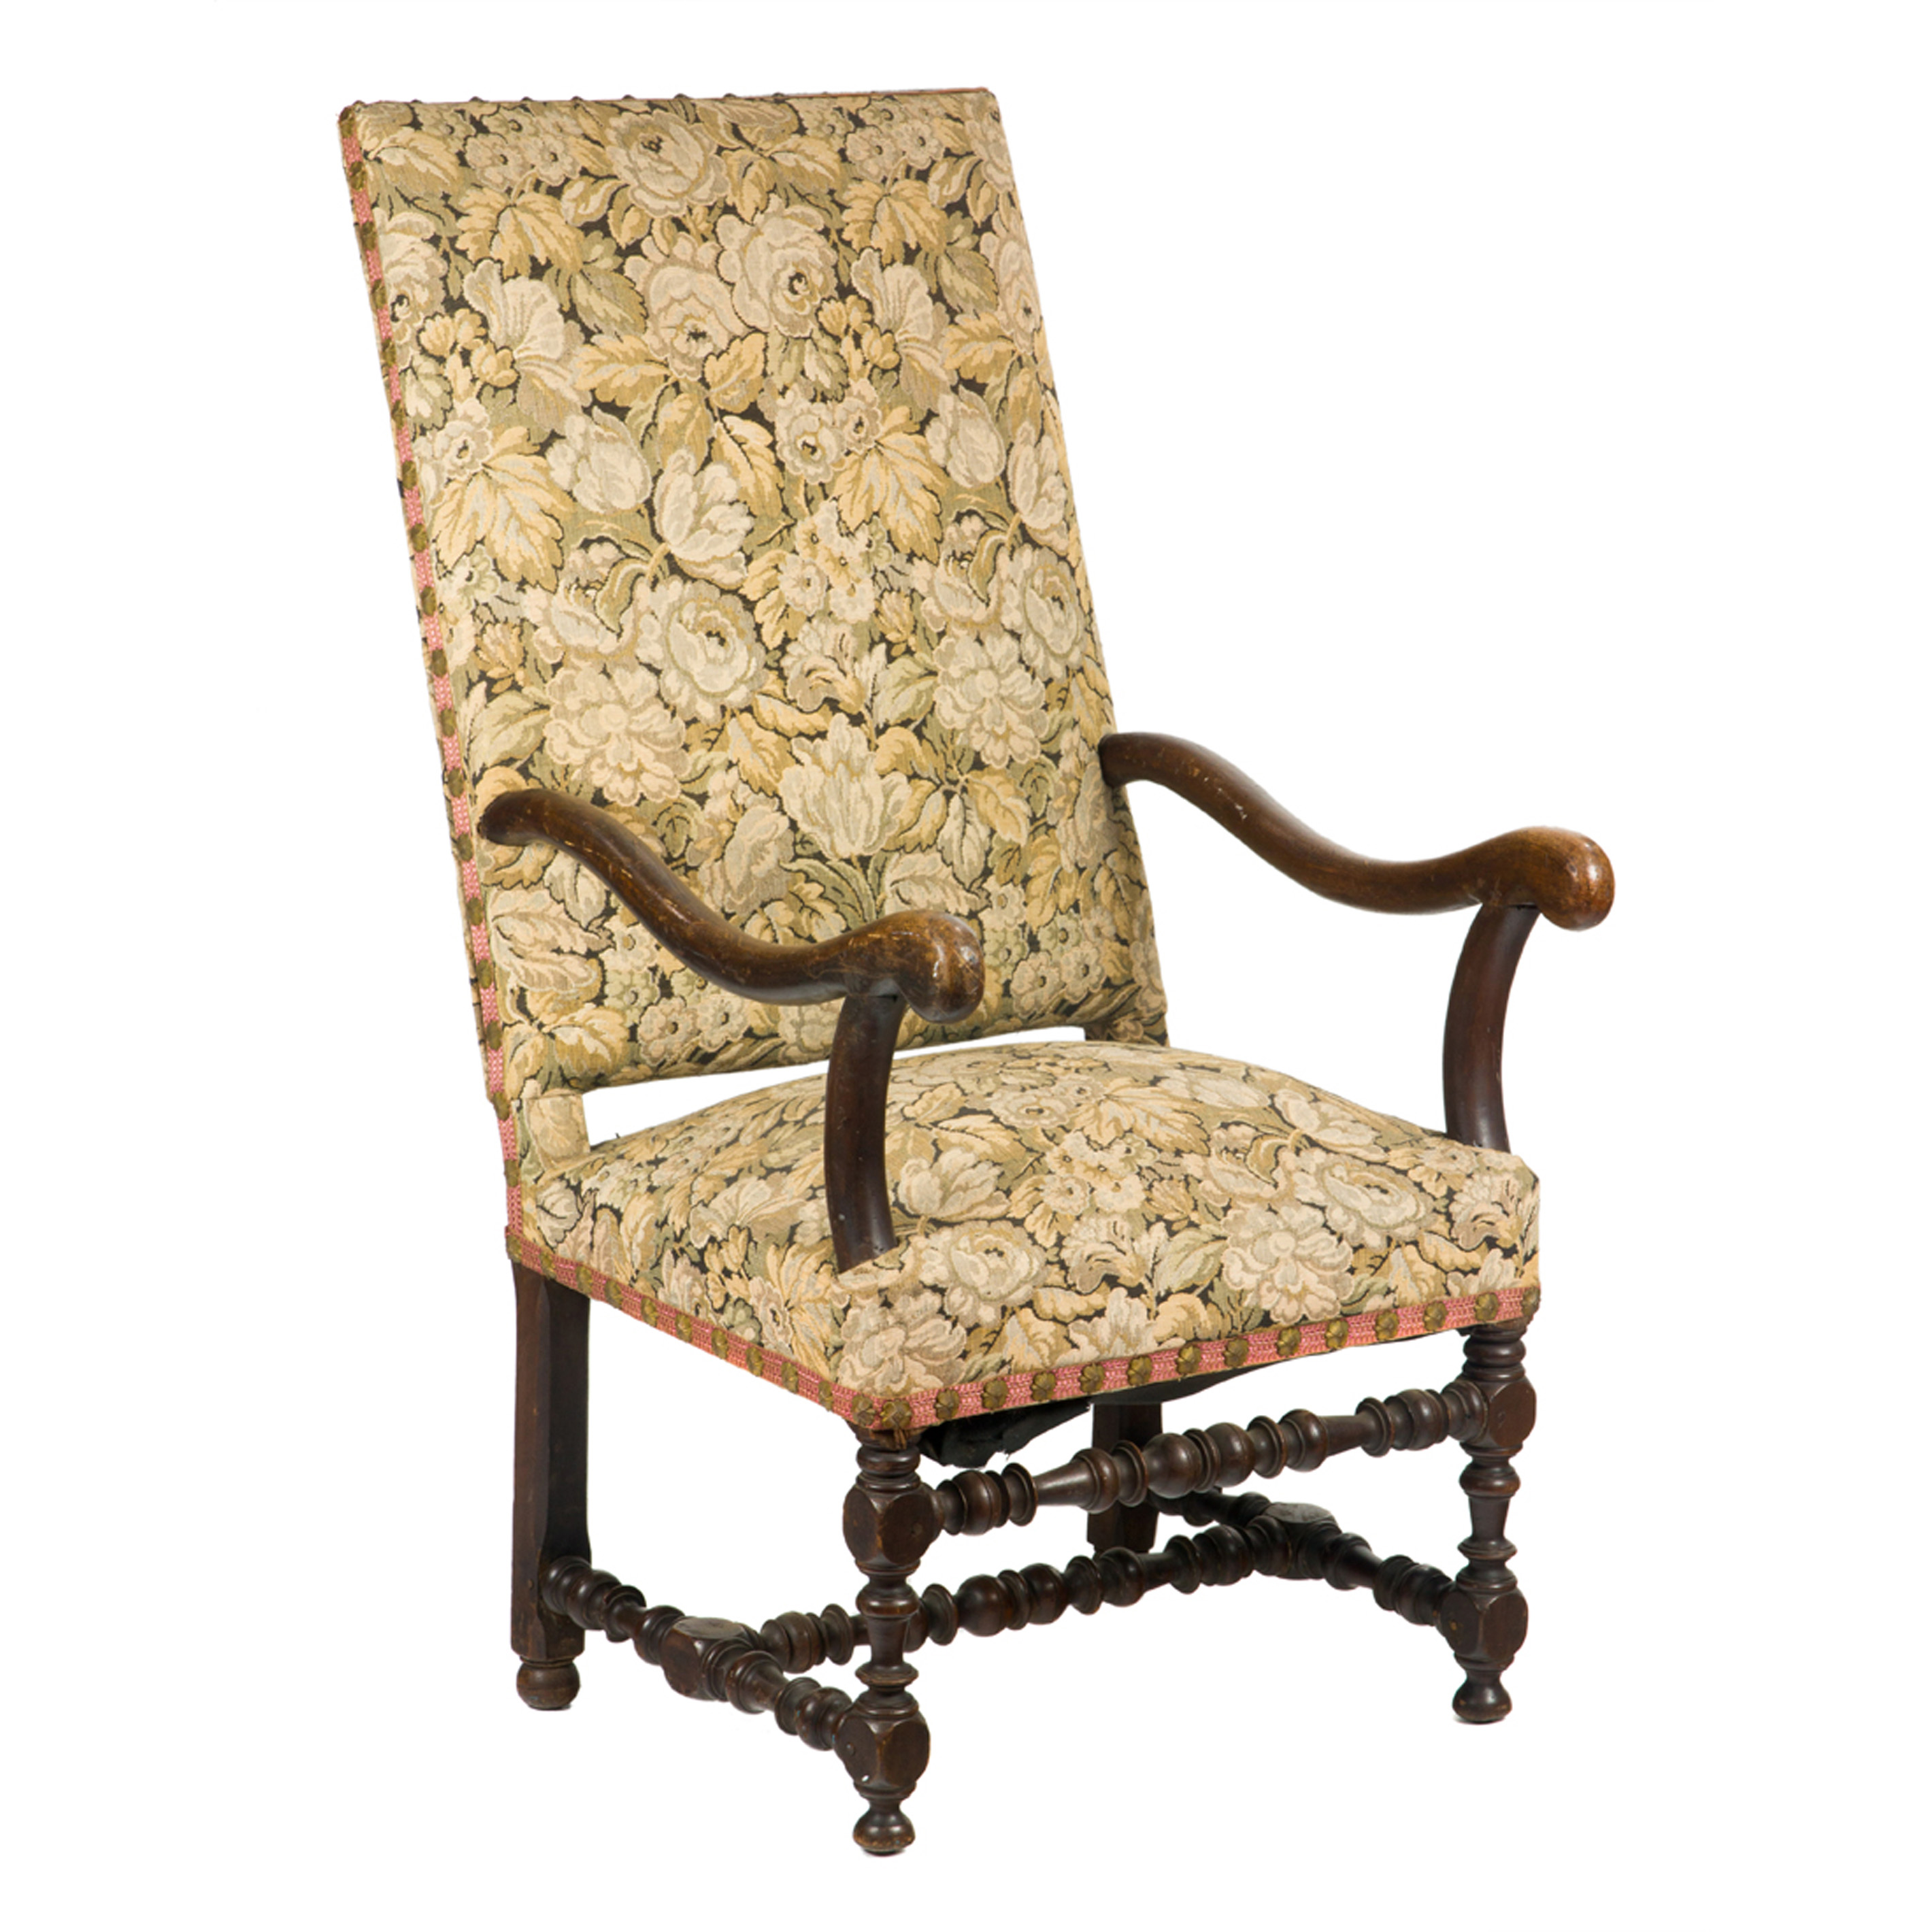 A WILLIAM AND MARY STYLE HALL CHAIR 3a374a